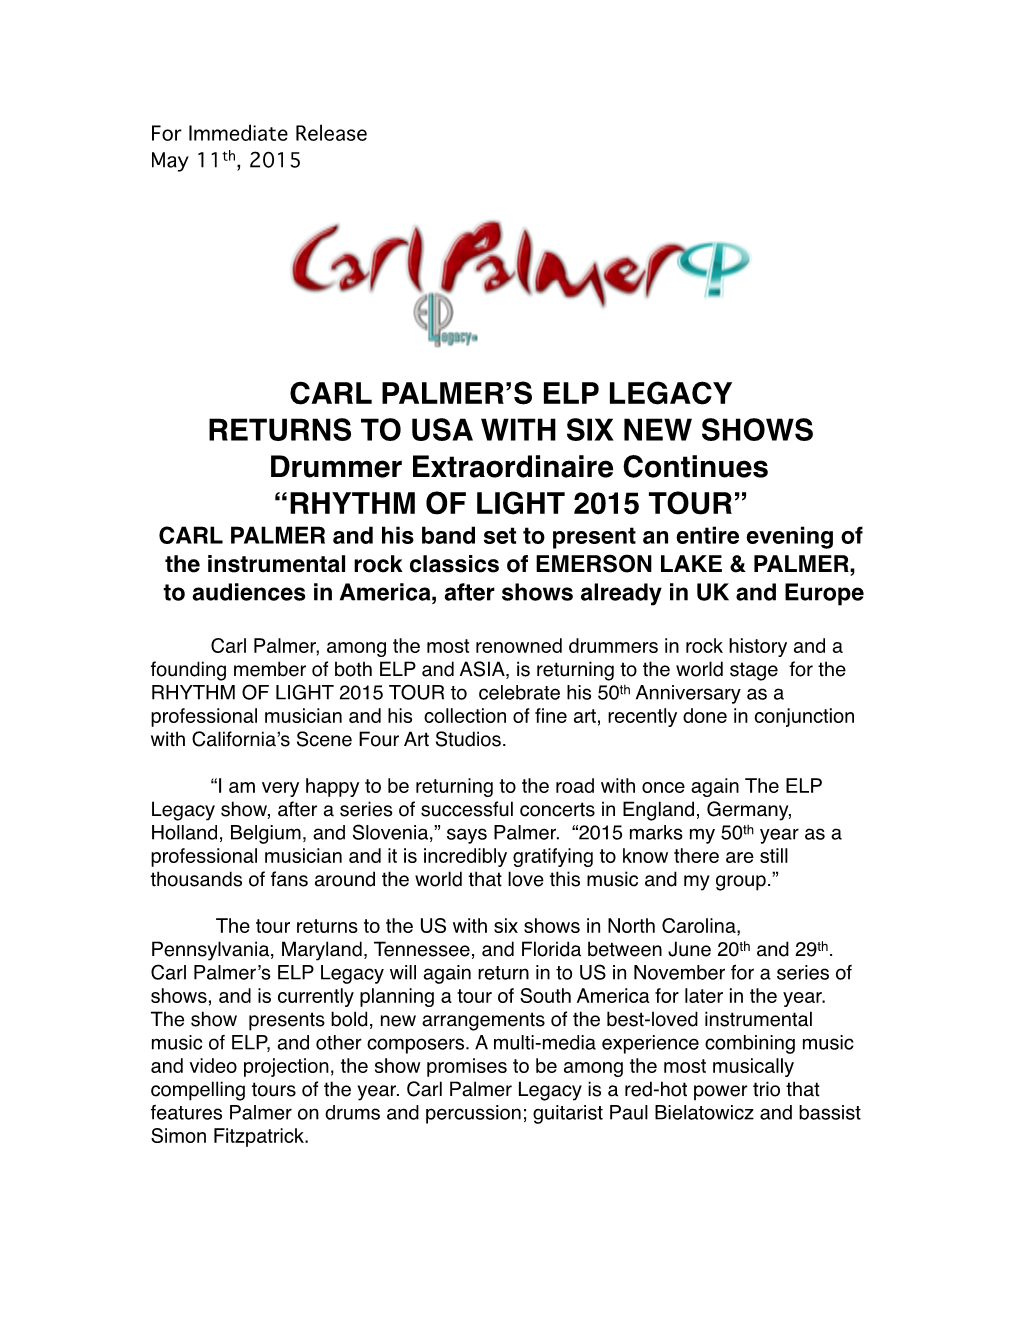 Carl Palmer's Elp Legacy Returns to Usa with Six New